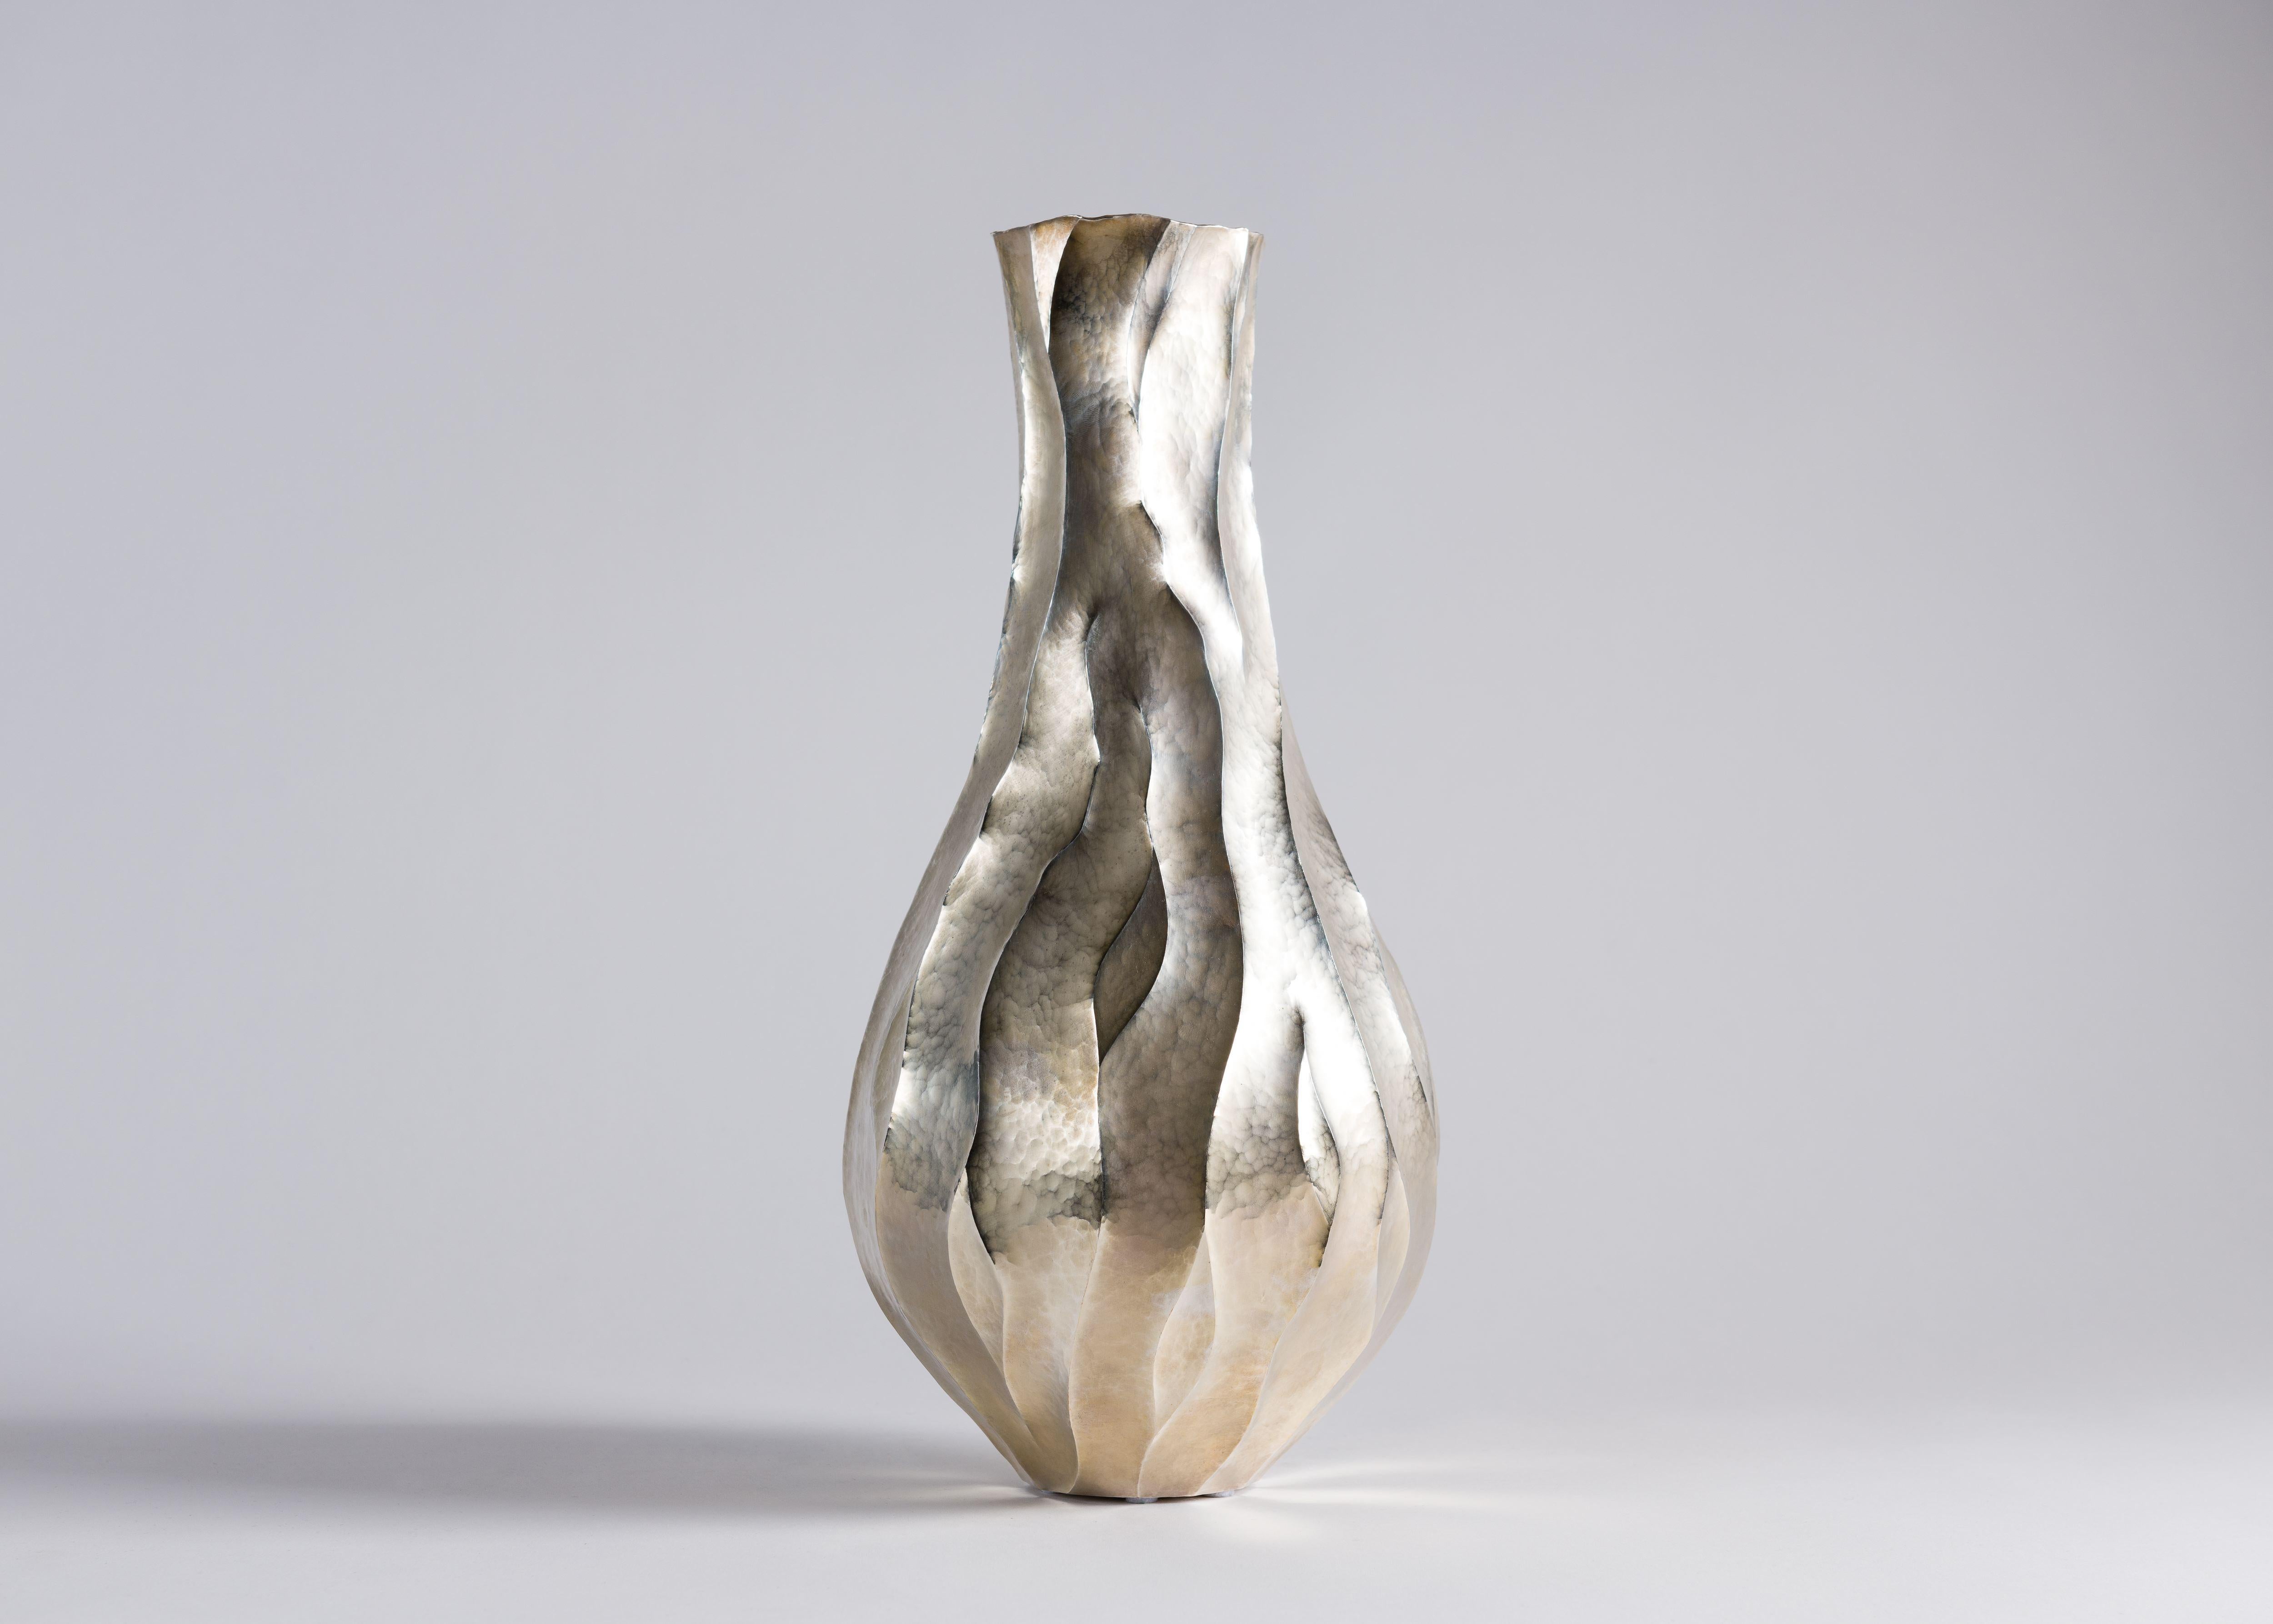 Formed from hand-hammered and silvered copper, this sleek vase gives the impression of roots straining through the earth toward the light, suggested by the subtle lines snaking up its surface.

Unique piece.
Stamped.